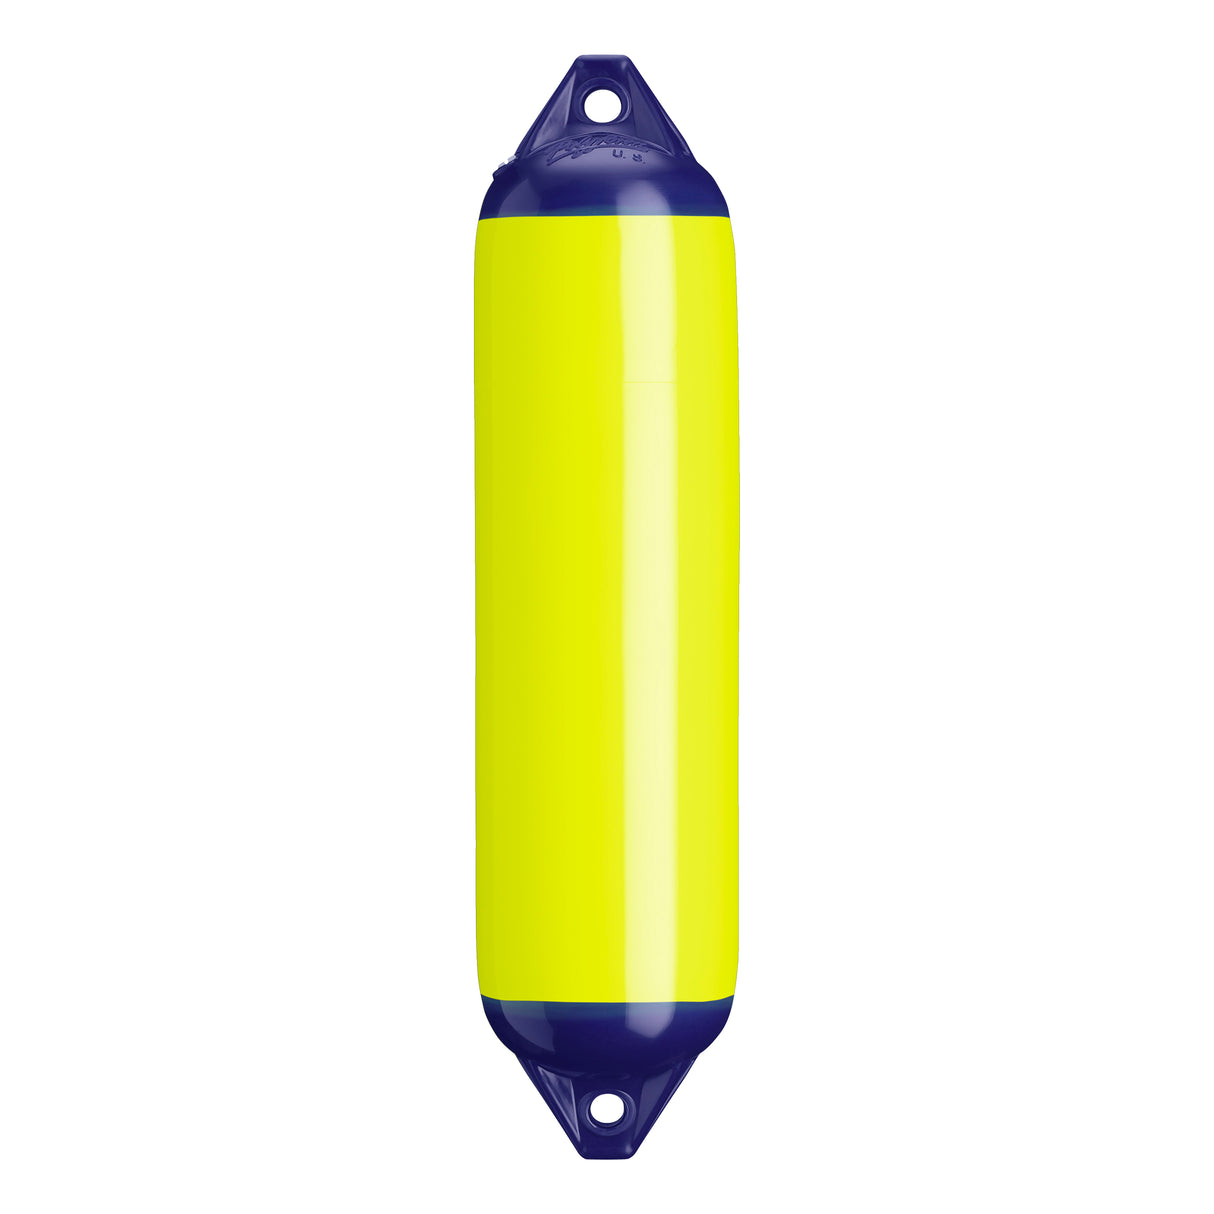 Saturn Yellow boat fender with Navy-Top, Polyform F-1 